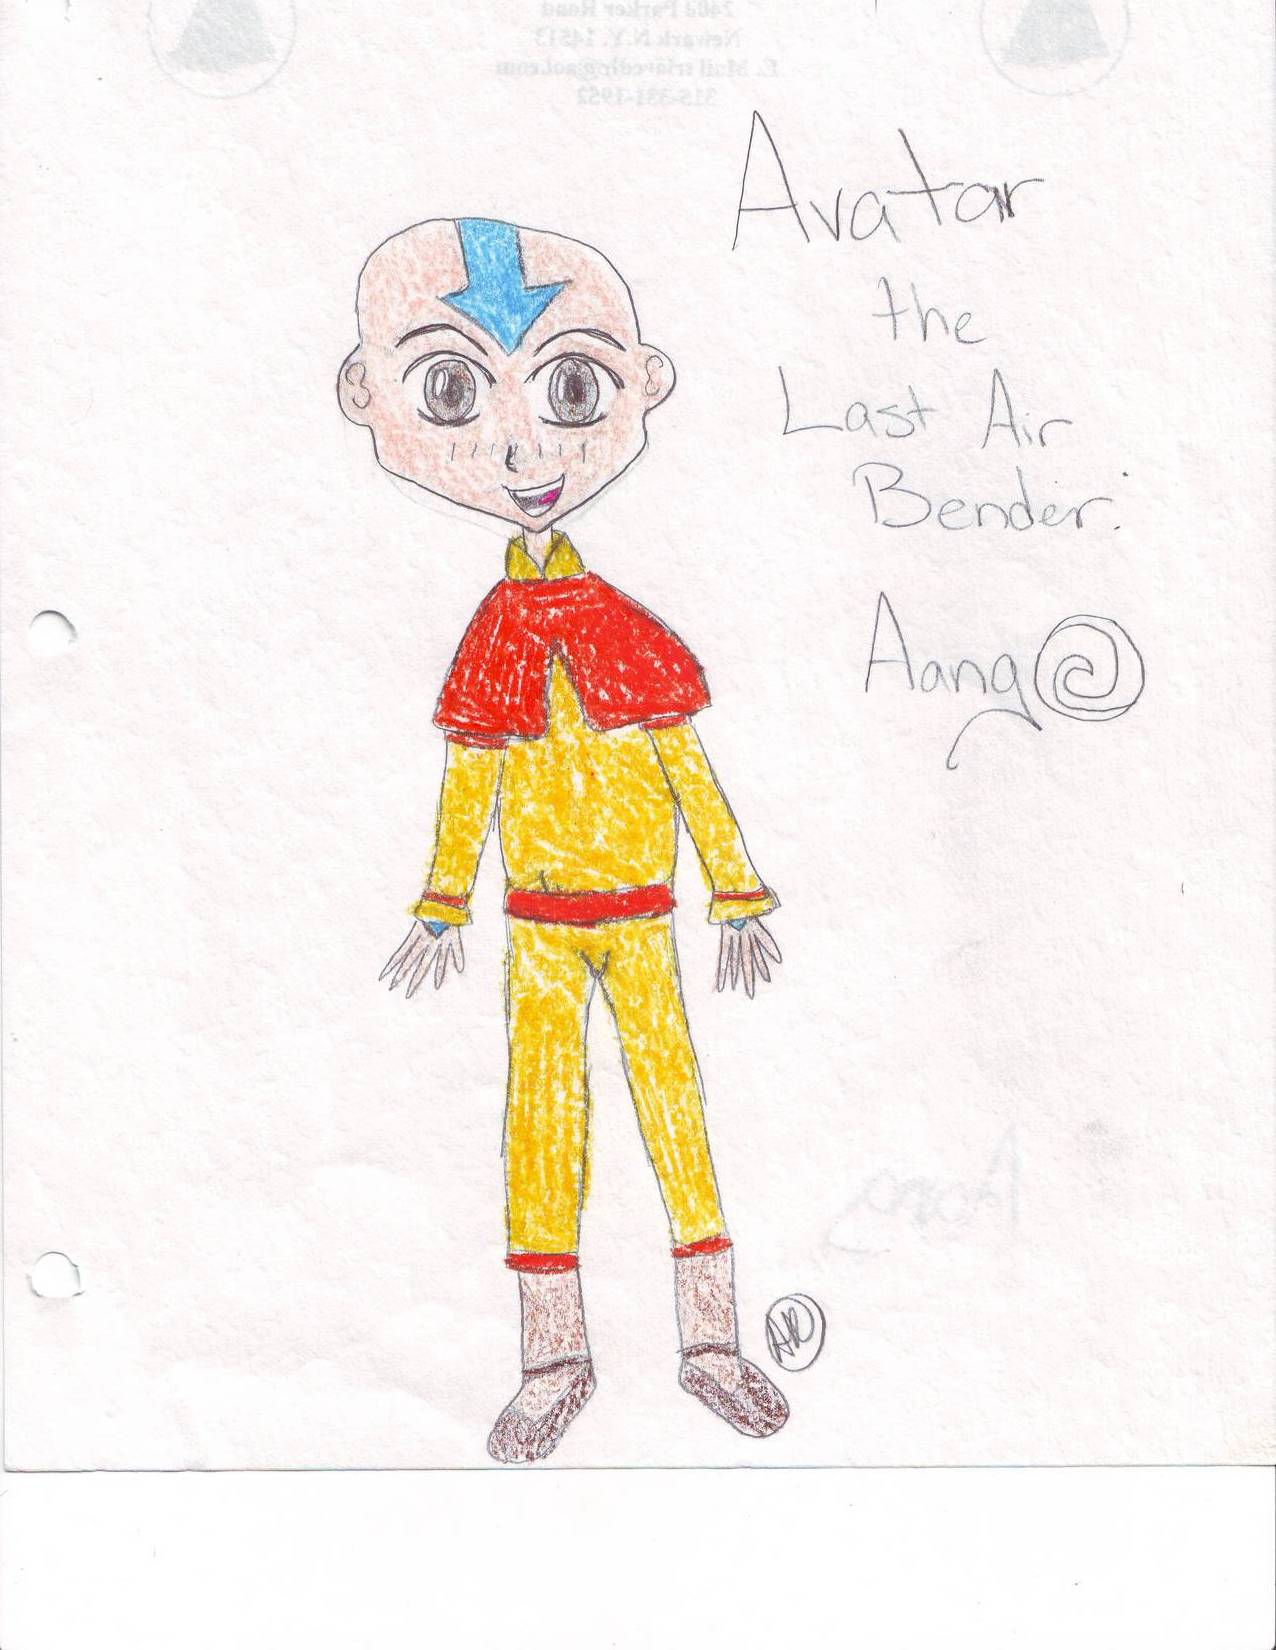 Aang by Ferret_Avatar22